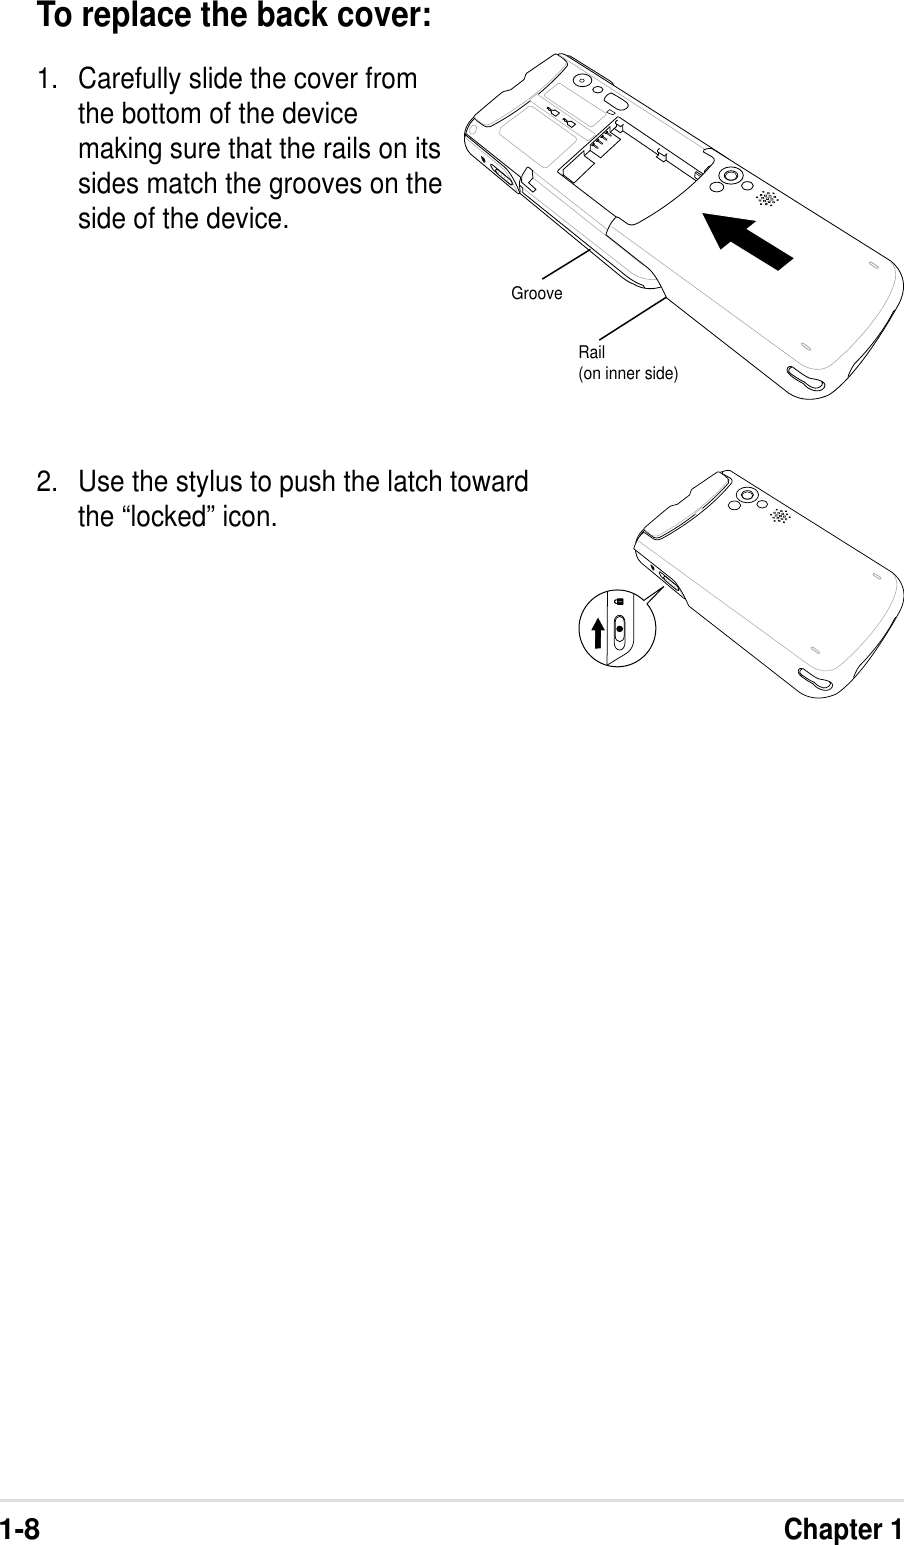 1-8Chapter 1To replace the back cover:1. Carefully slide the cover fromthe bottom of the devicemaking sure that the rails on itssides match the grooves on theside of the device.2. Use the stylus to push the latch towardthe “locked” icon.GrooveRail(on inner side)